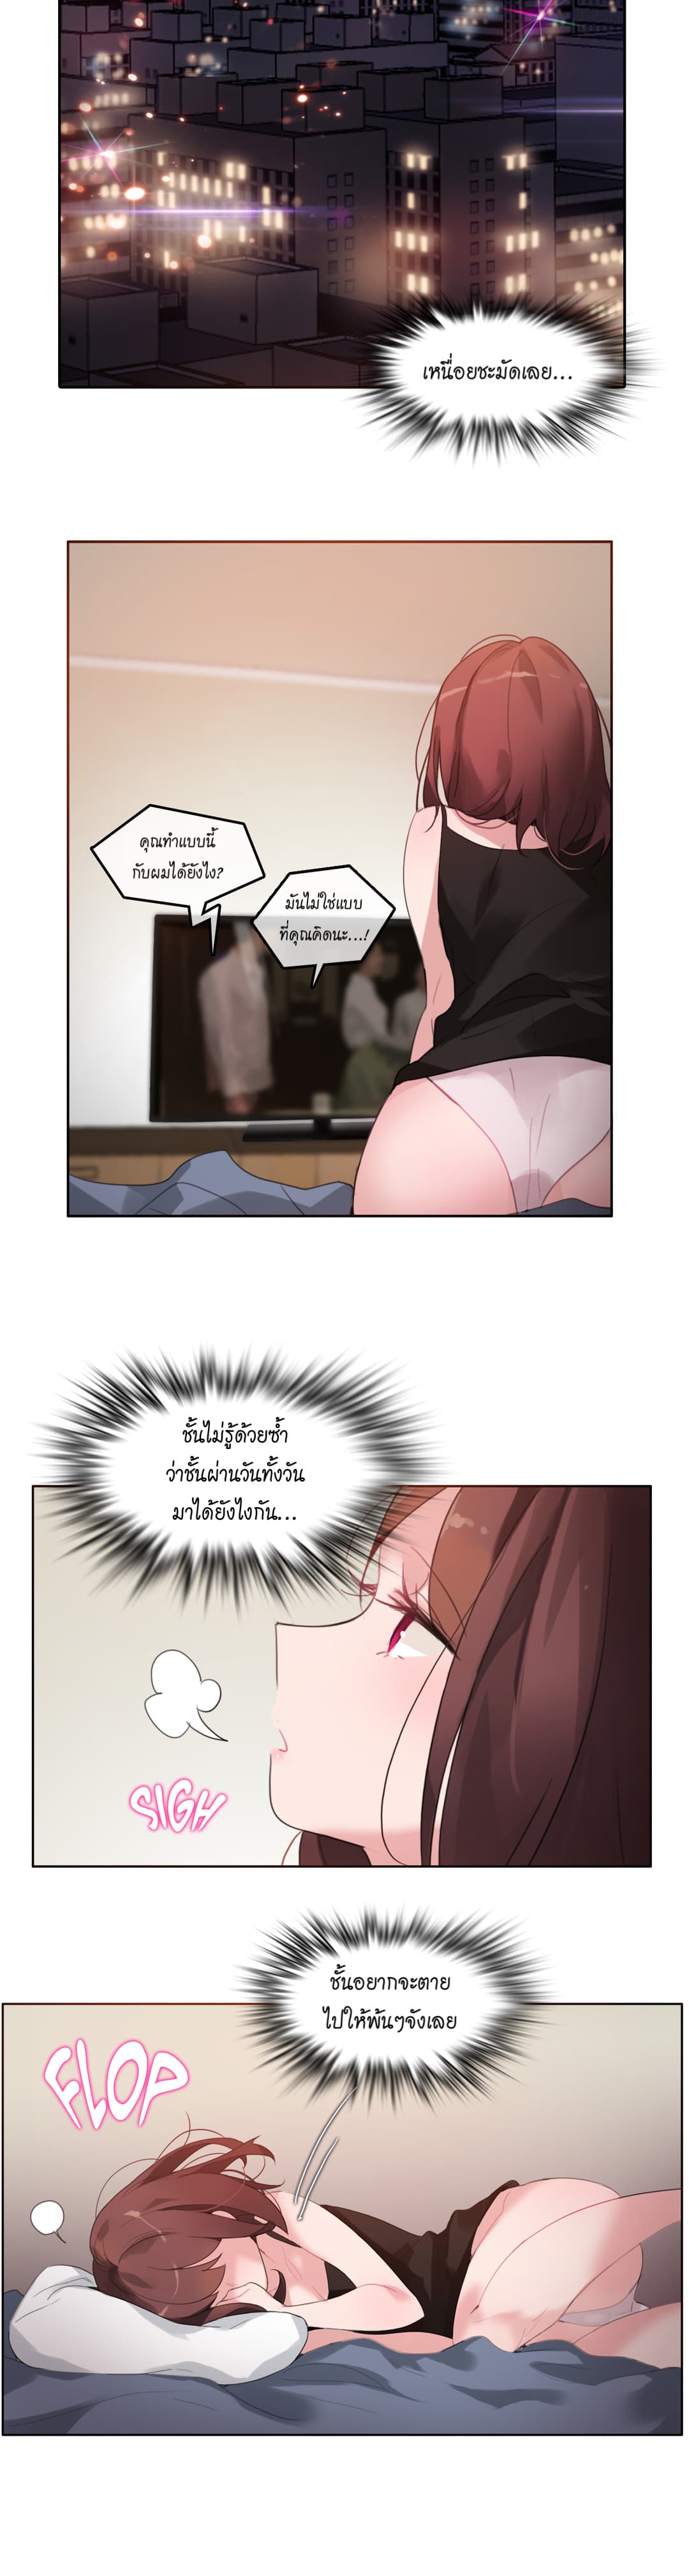 A Pervert’s Daily Life 26 (22)